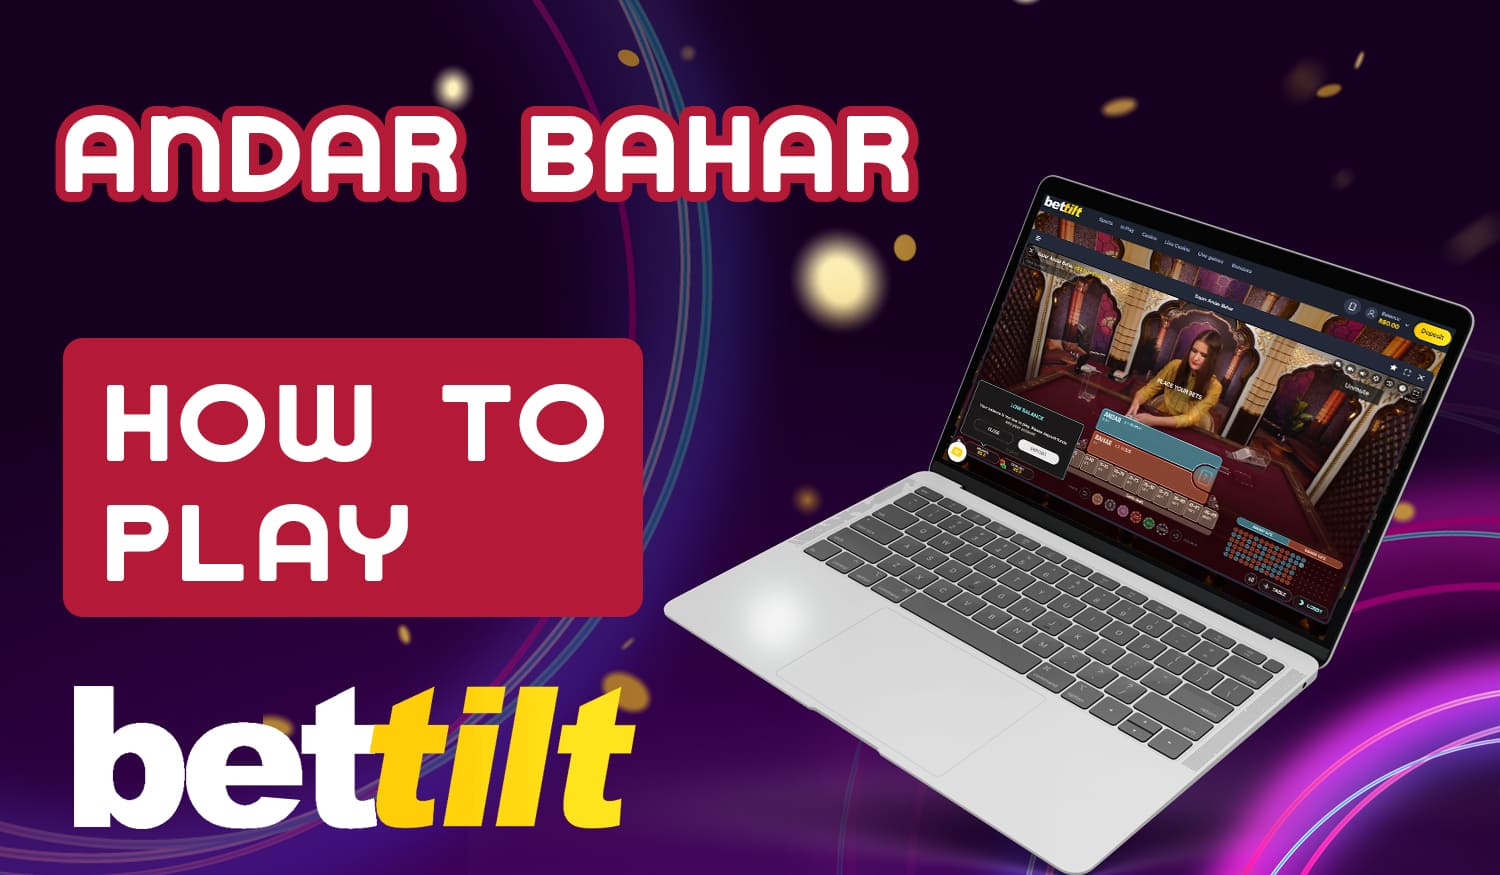 Step-by-step instructions on how to start playing Andar Bahar at Bettilt